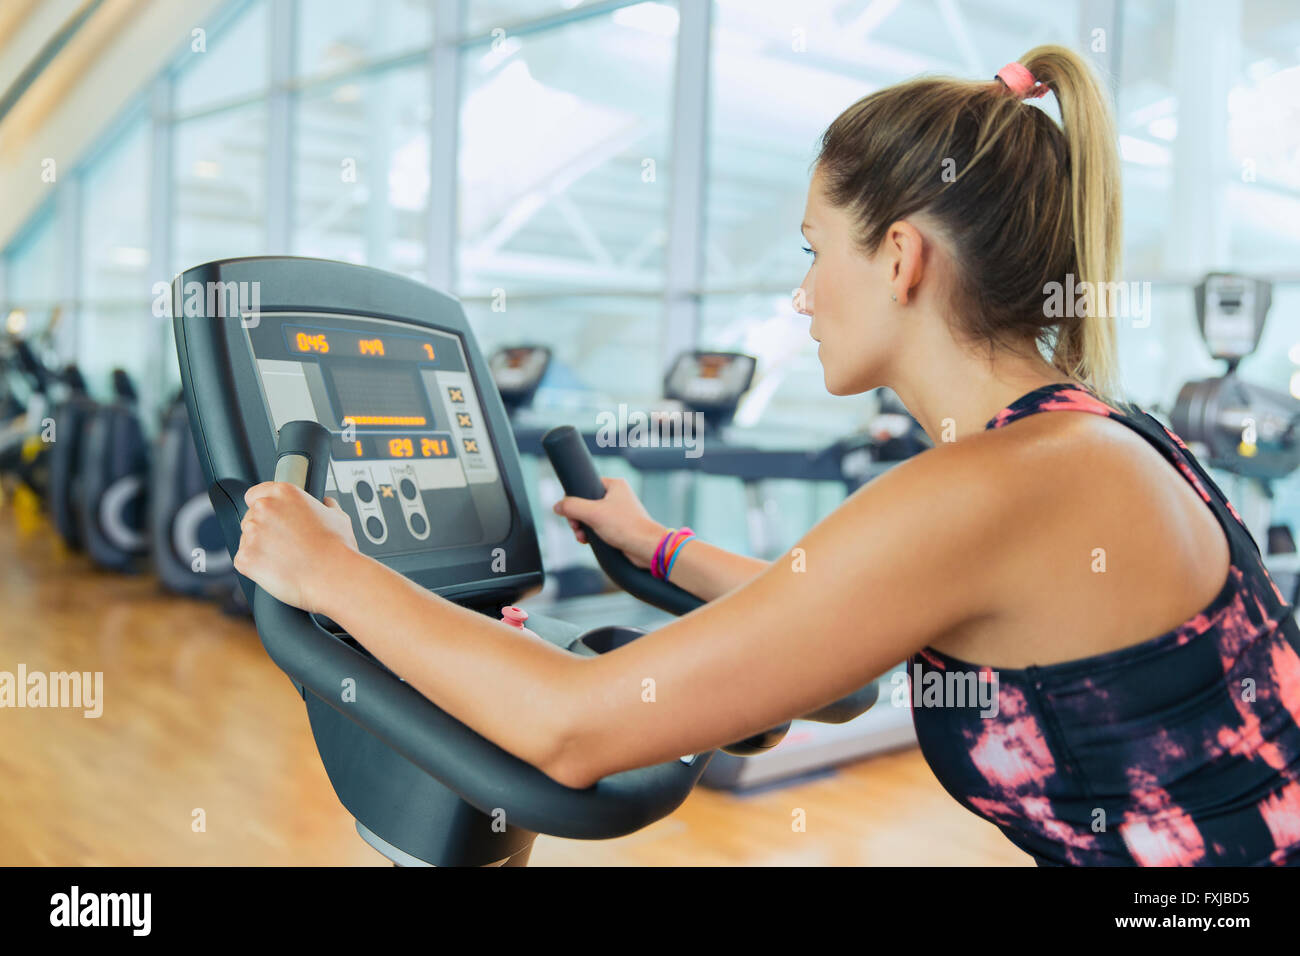 Woman riding exercise bike at gym Banque D'Images